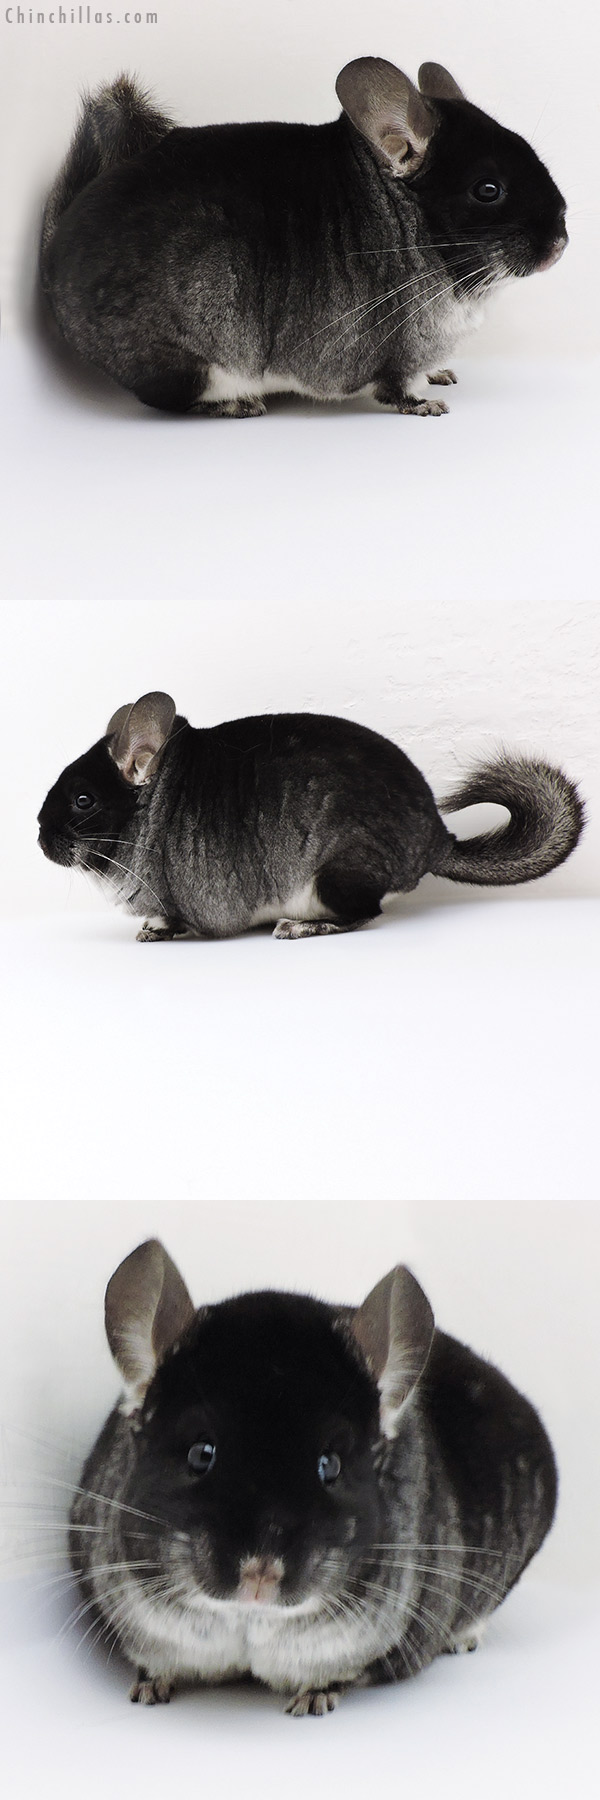 Chinchilla or related item offered for sale or export on Chinchillas.com - 18186 Large Top Show Quality Black Velvet ( Violet & Sapphire Carrier ) Male Chinchilla